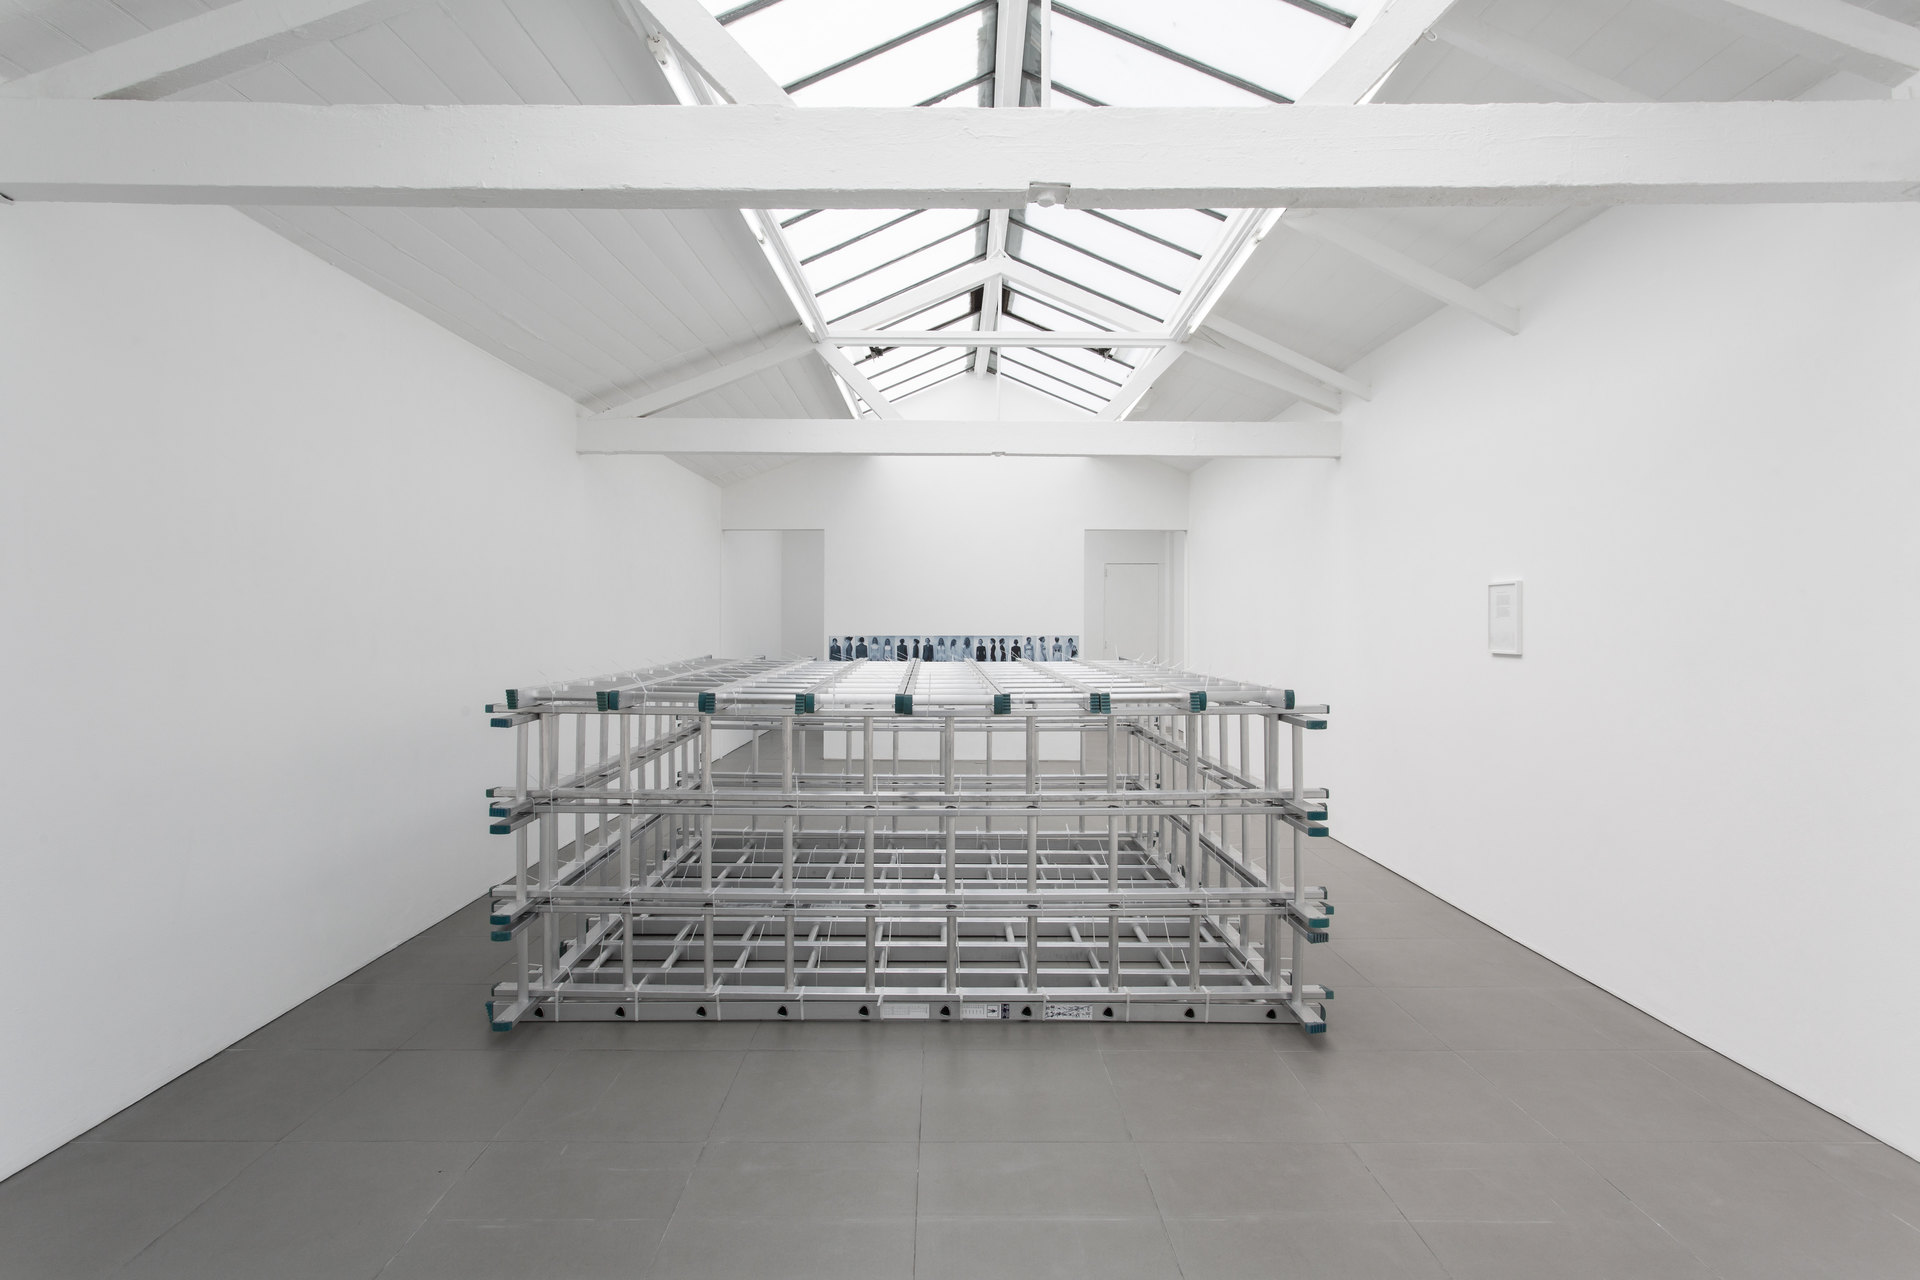 Anna-Sophie Berger, A Failed Play, installation view, 2019, Cell Project Space